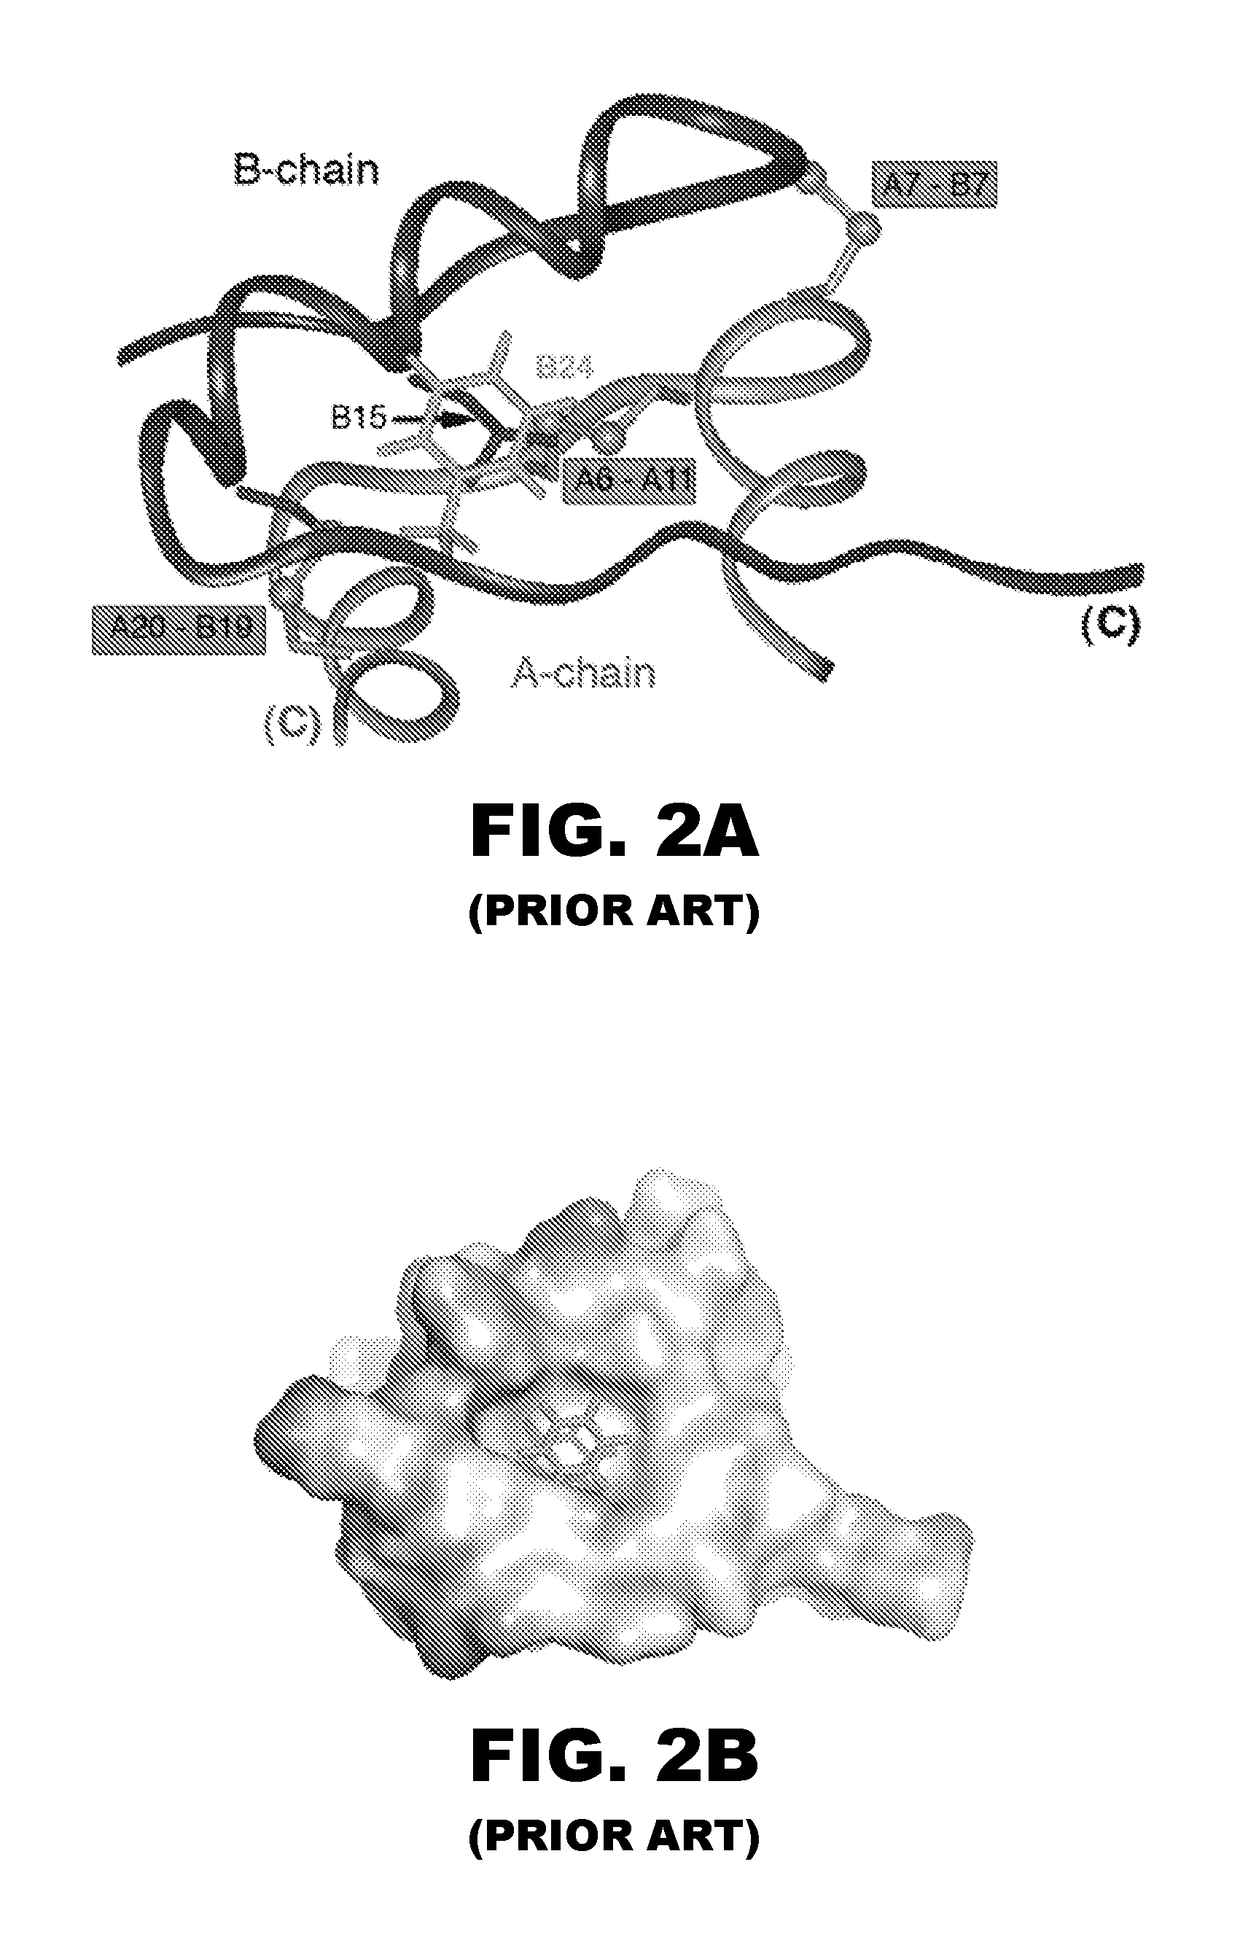 Ultra-concentrated rapid-acting insulin analogue formulations